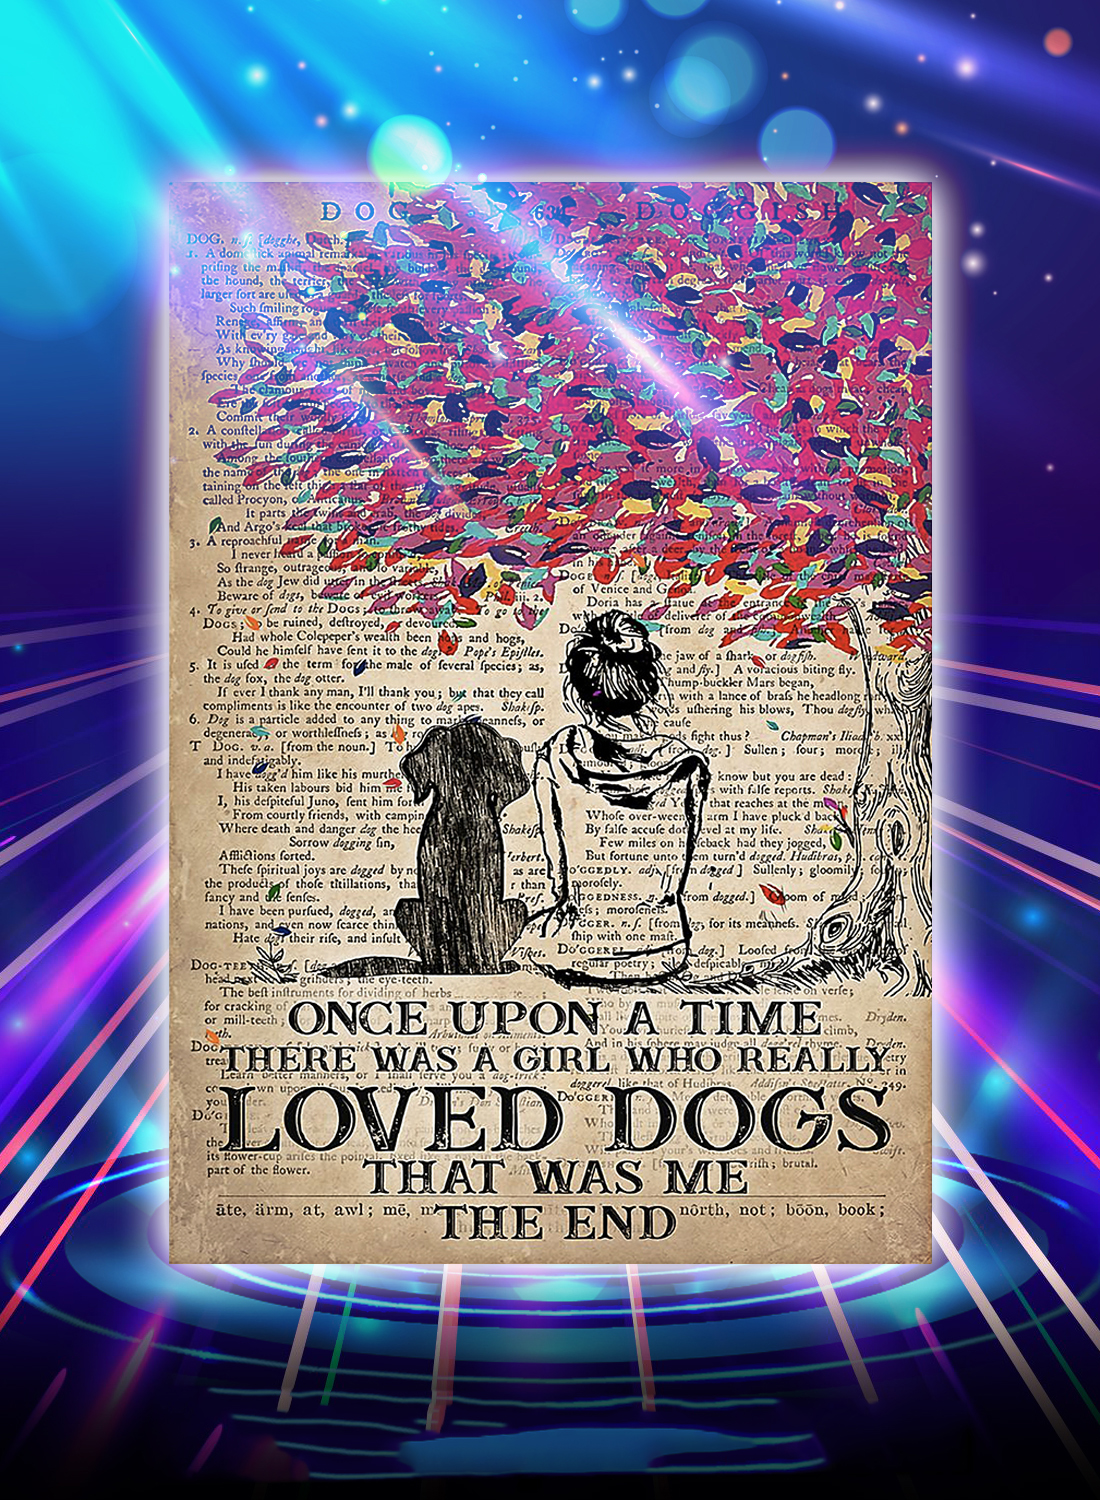 Once upon a time there was a girl who really loved dogs poster